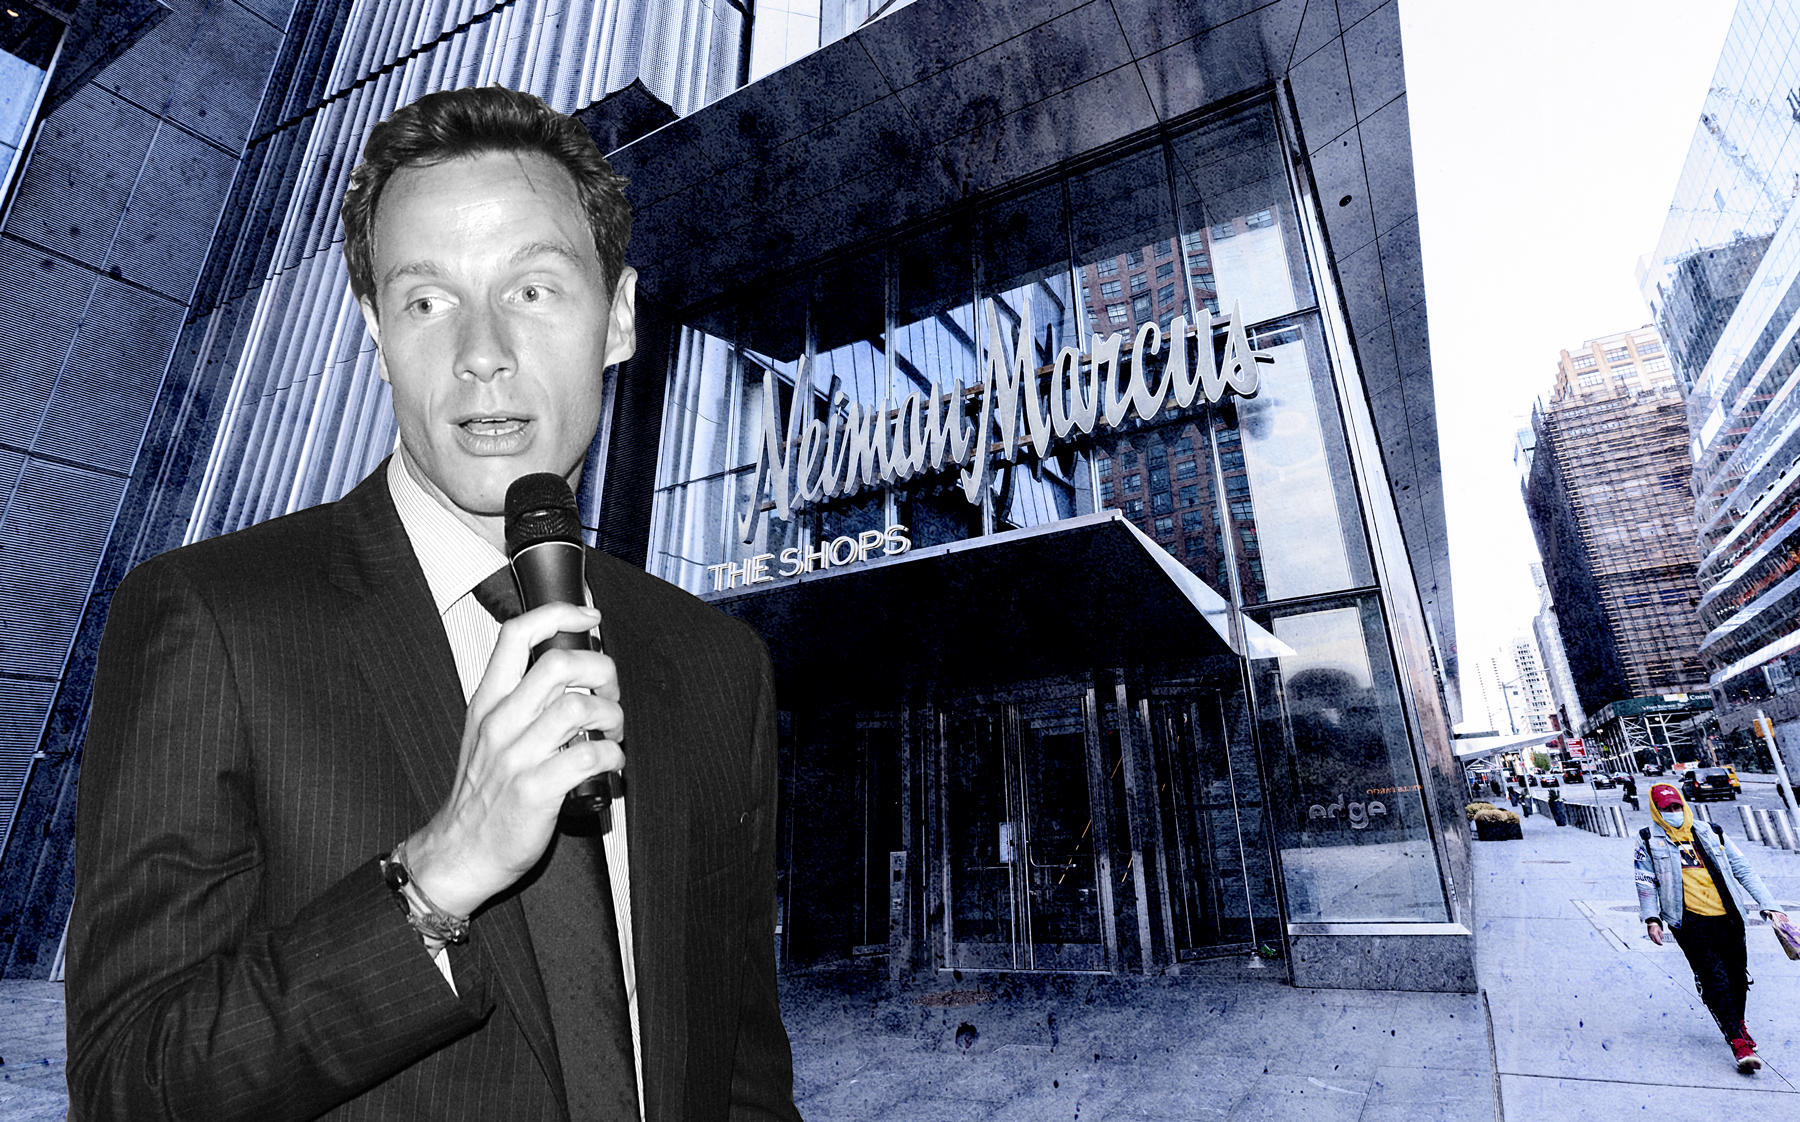 Neiman Marcus Group CEO Geoffroy van Raemdonck and Neiman Marcus at Hudson Yards (Credit: Raemdonck by NEIL RASMUS/Patrick McMullan via Getty Images; background by Noam Galai/Getty Images)